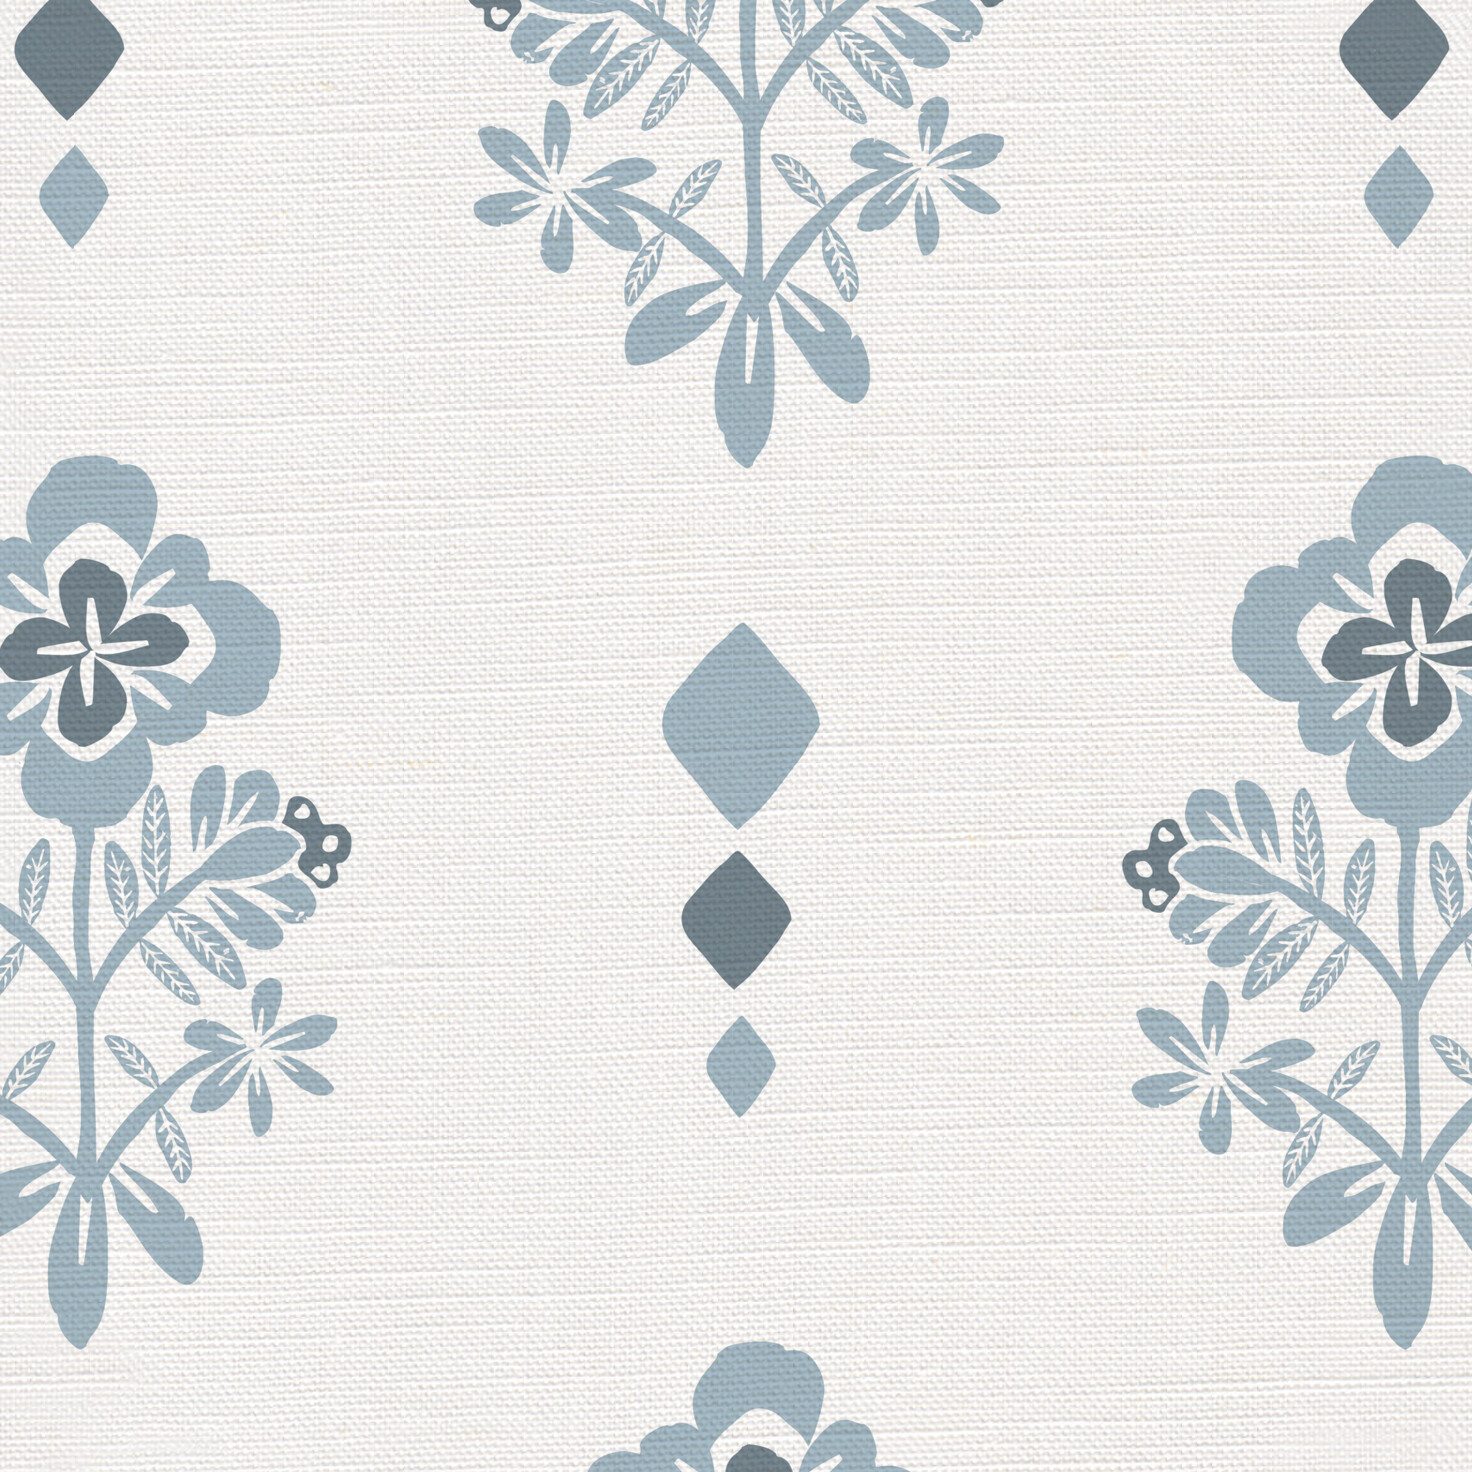 Floret Fabric in Blue on a White Background